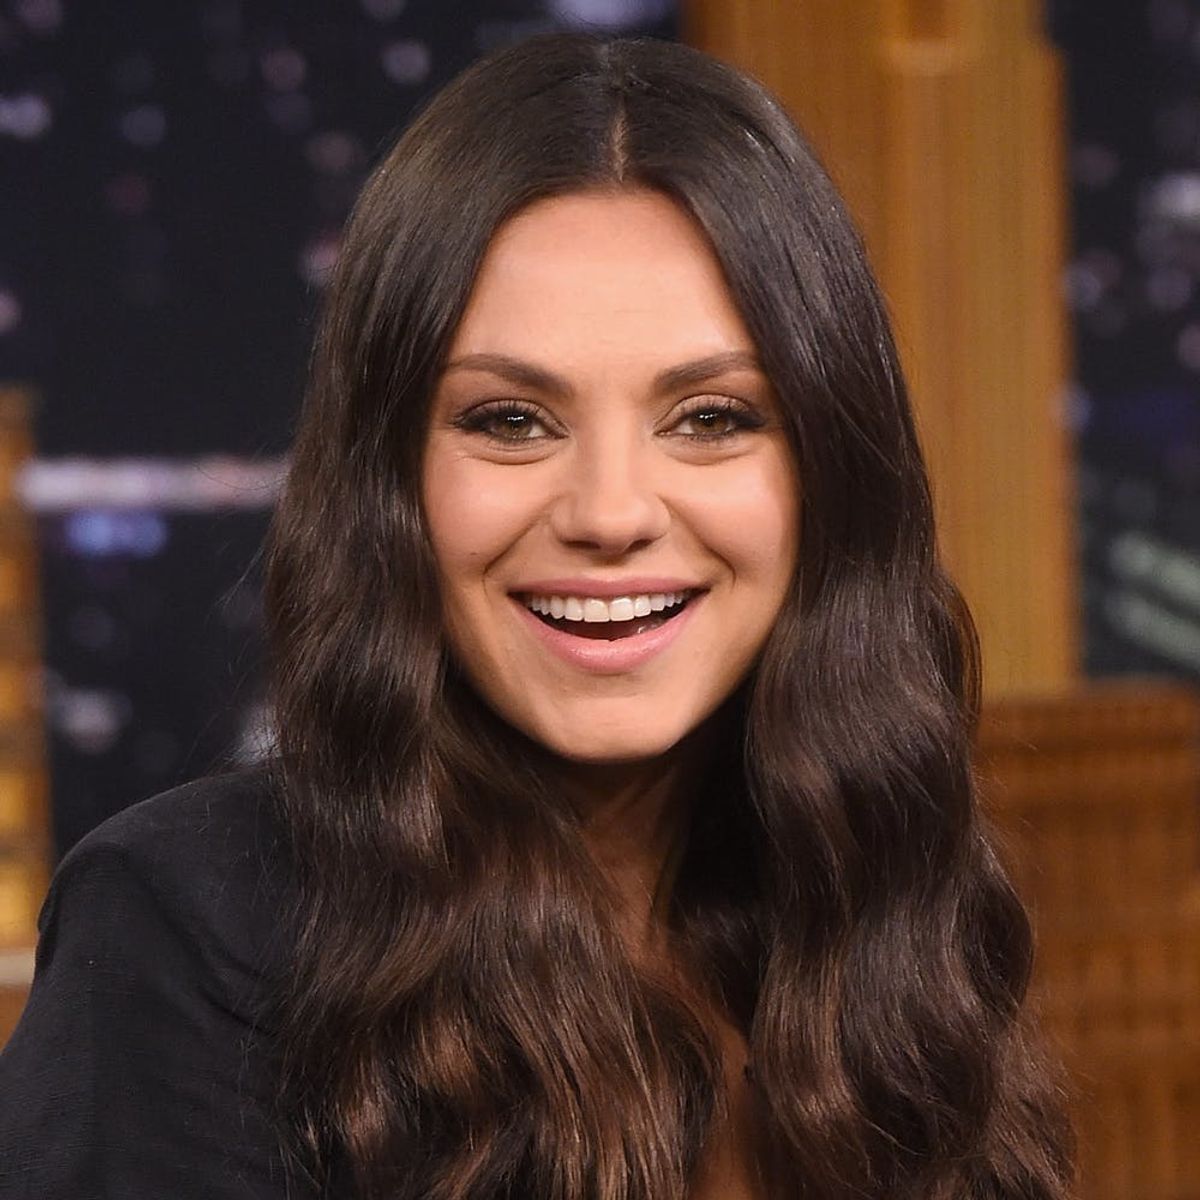 Mila Kunis Cut Her Famously Long Hair and We’re Shook